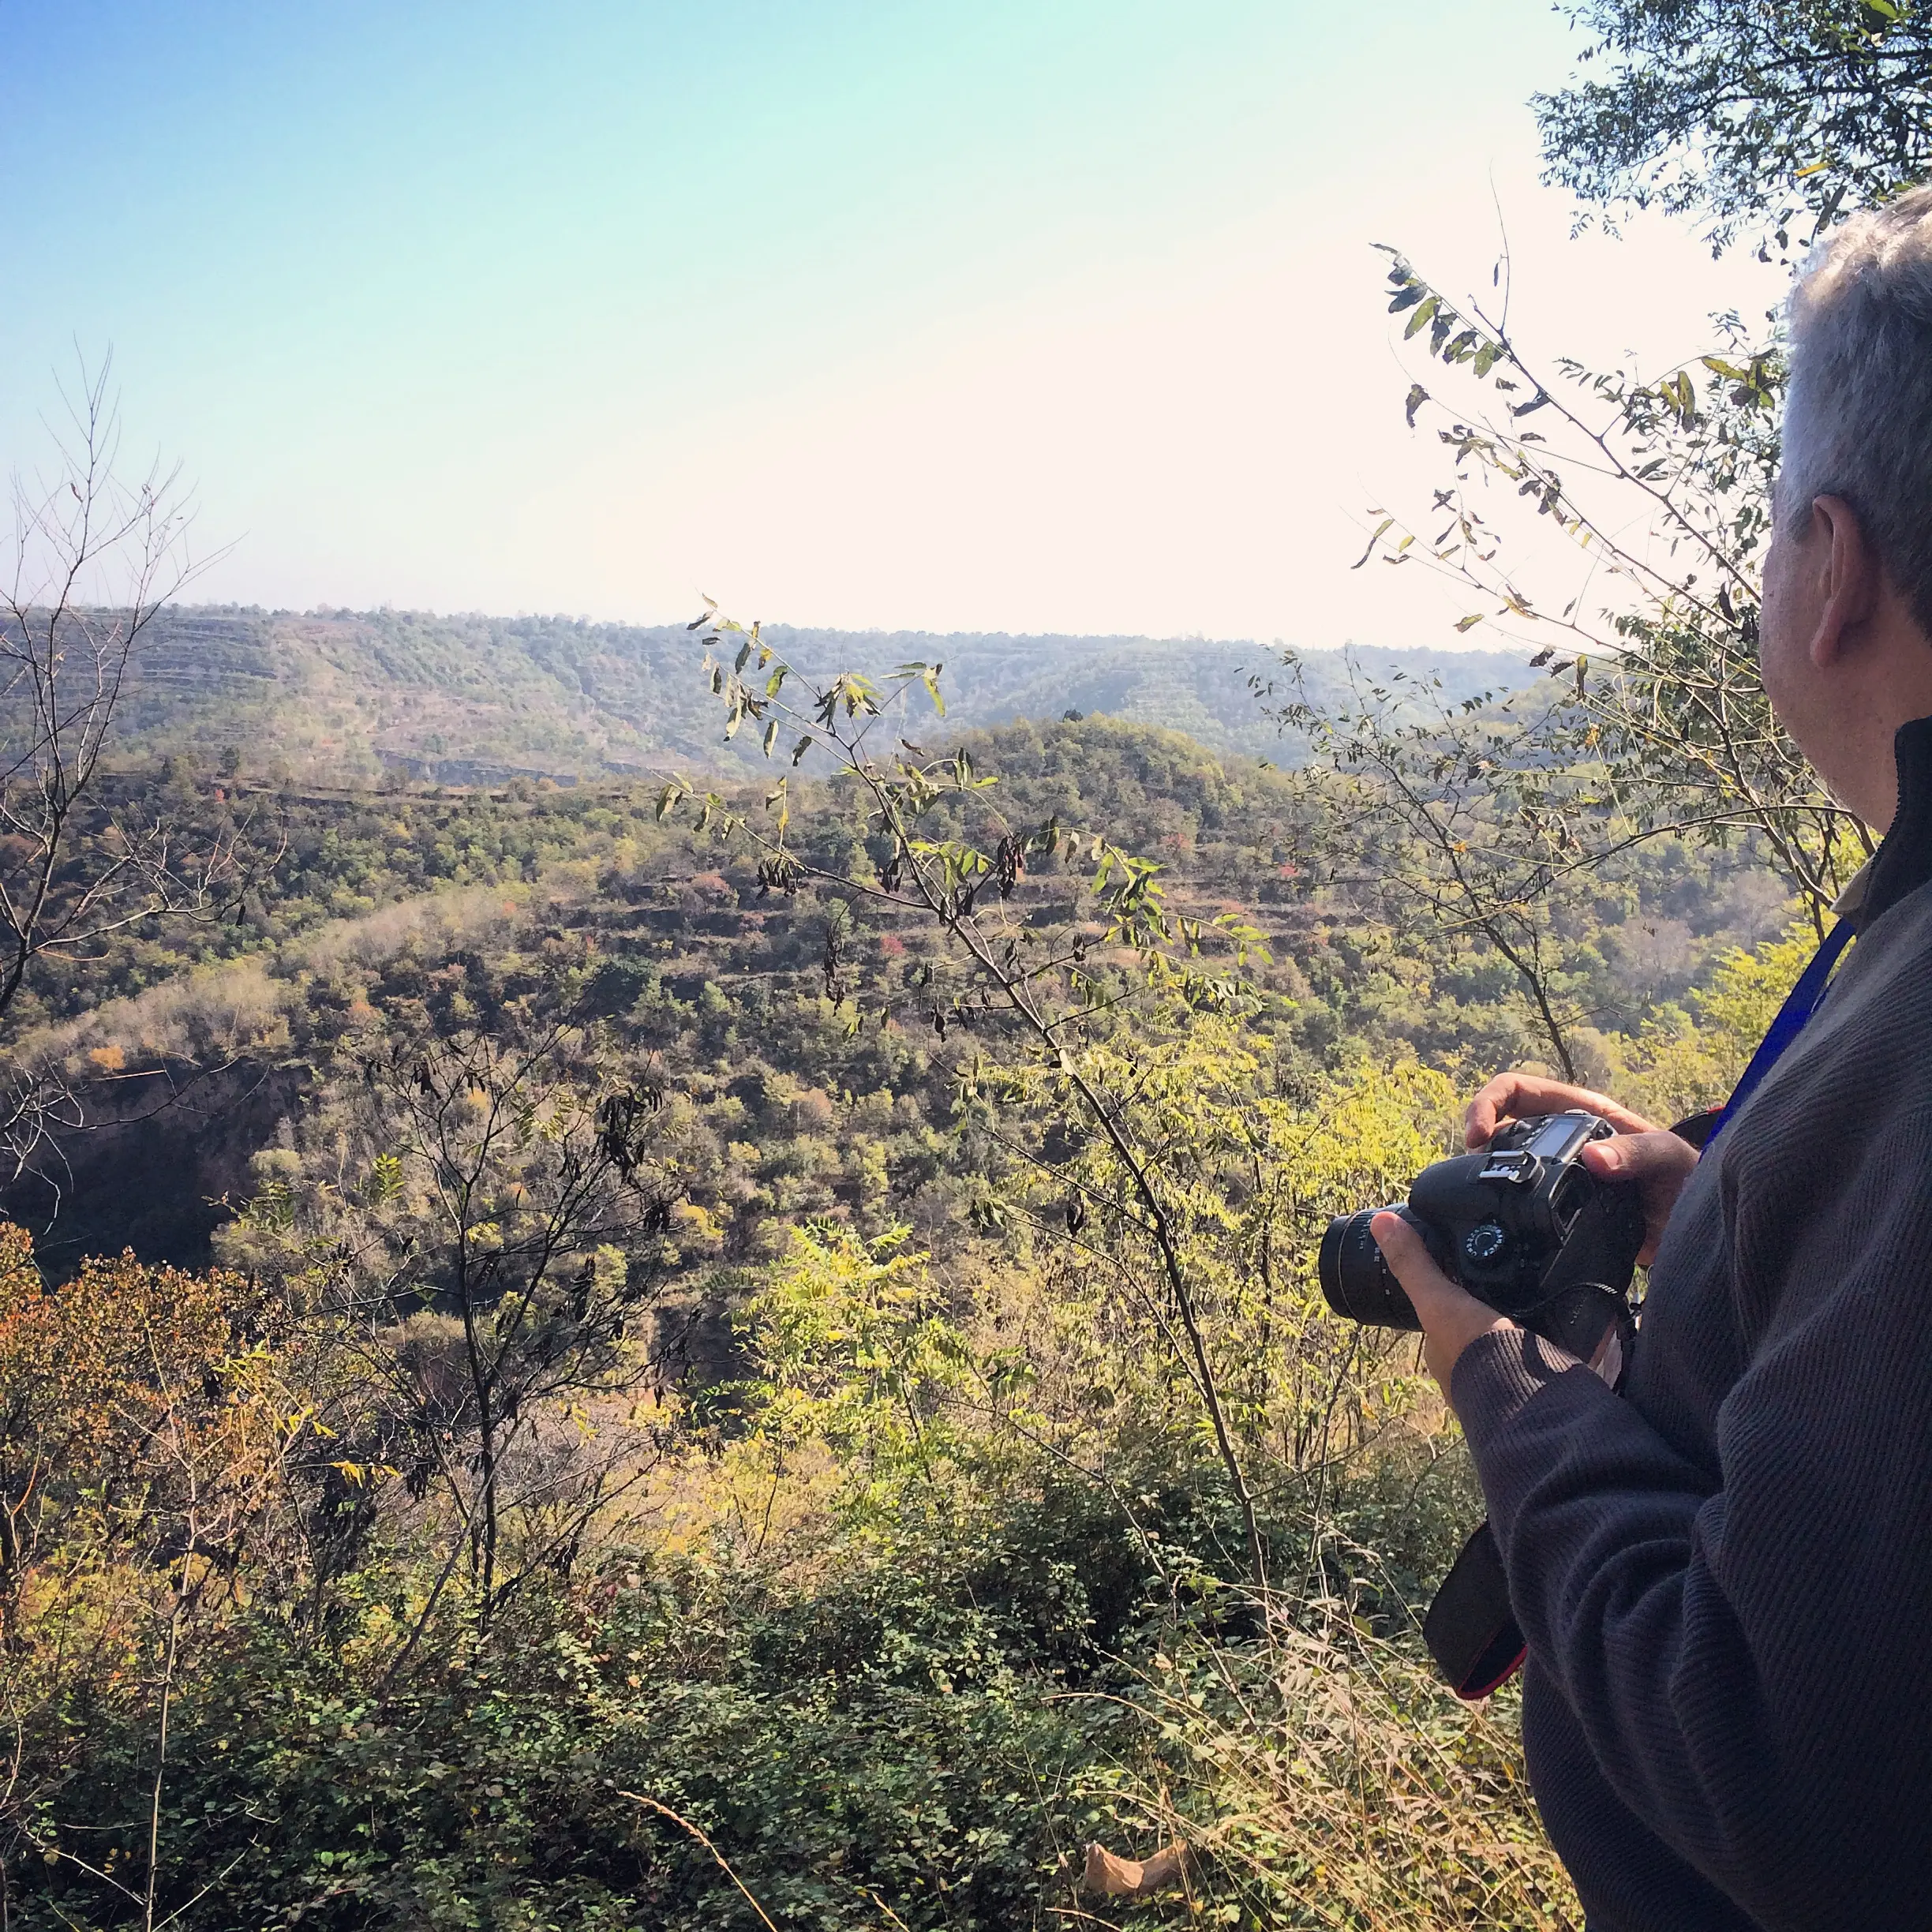 Viewing the restored forests of China's Loess Plateau